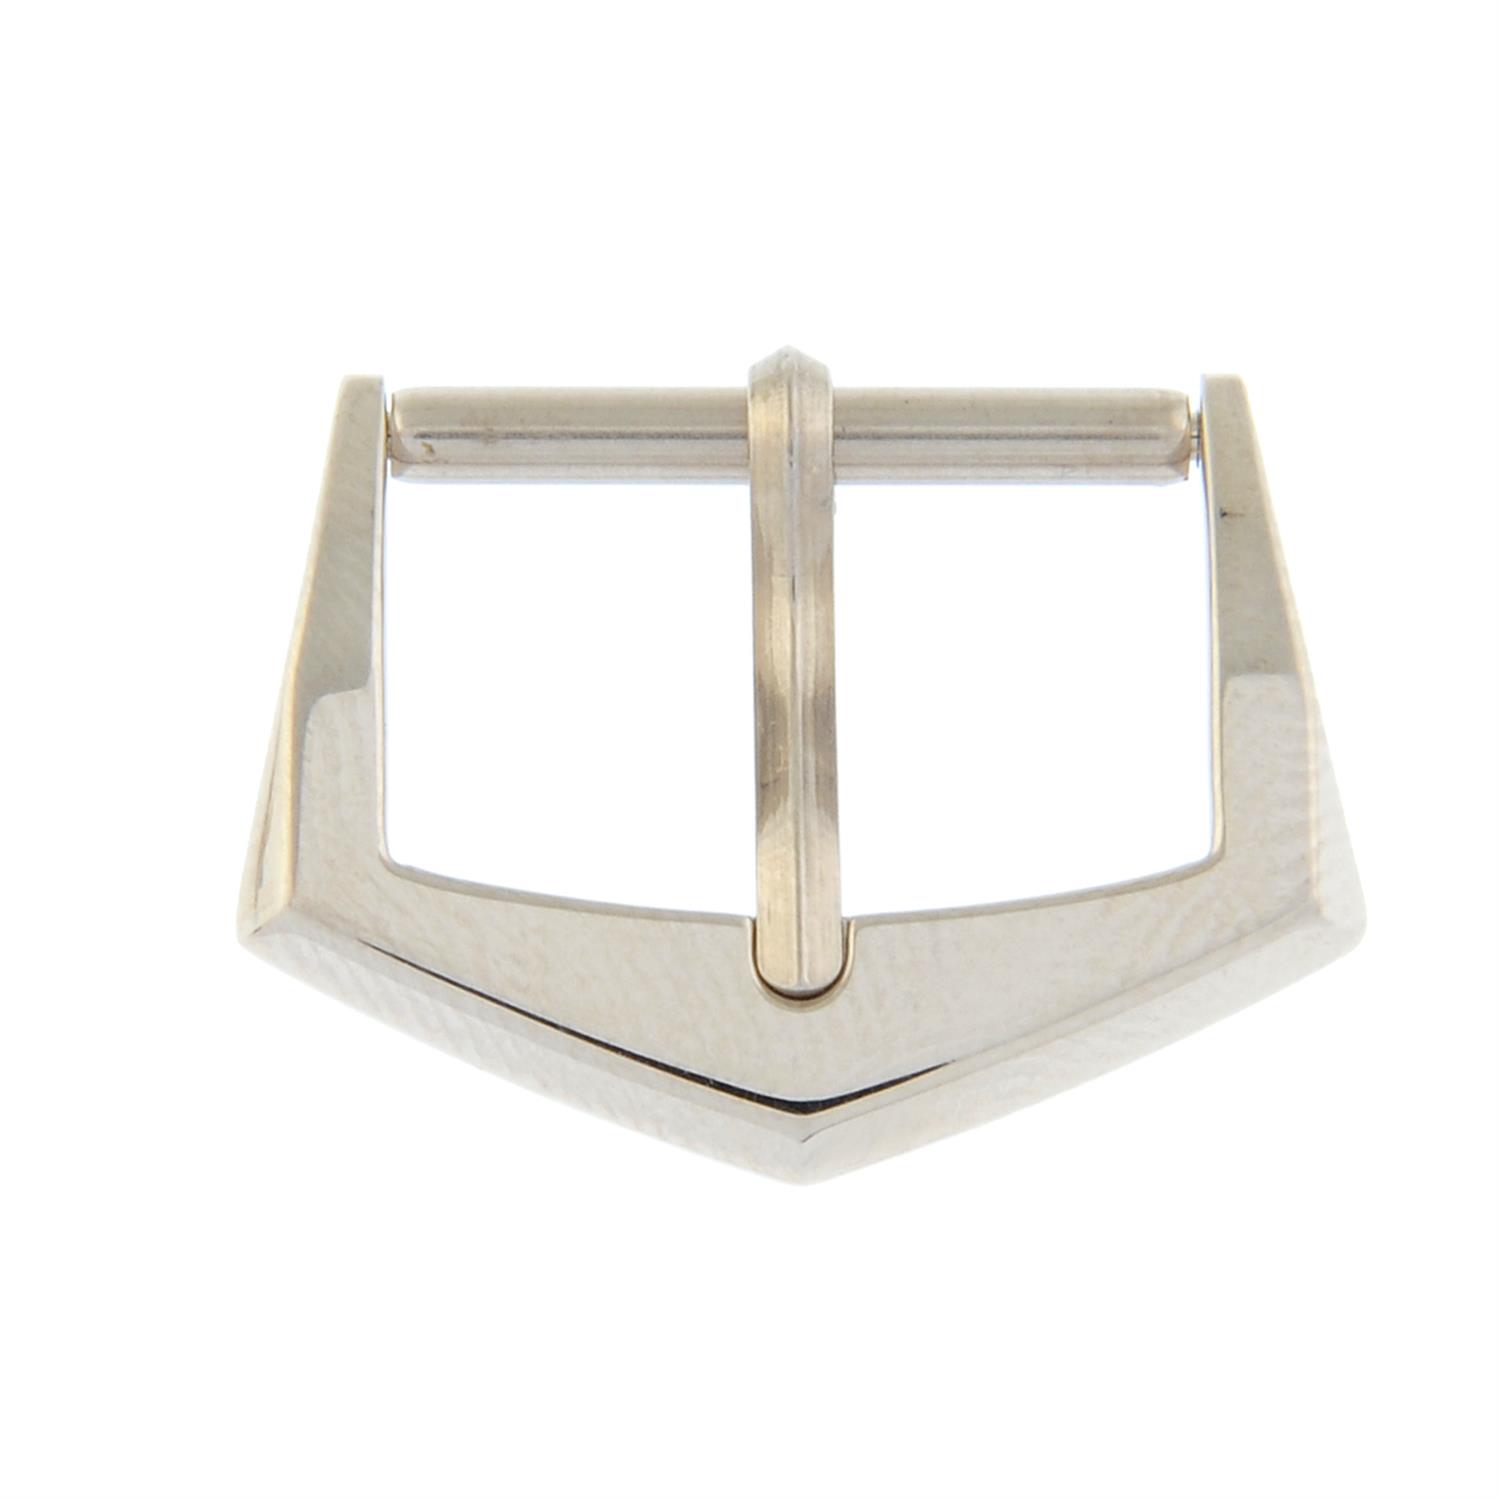 Patek Philippe - an 18ct white gold pin buckle.